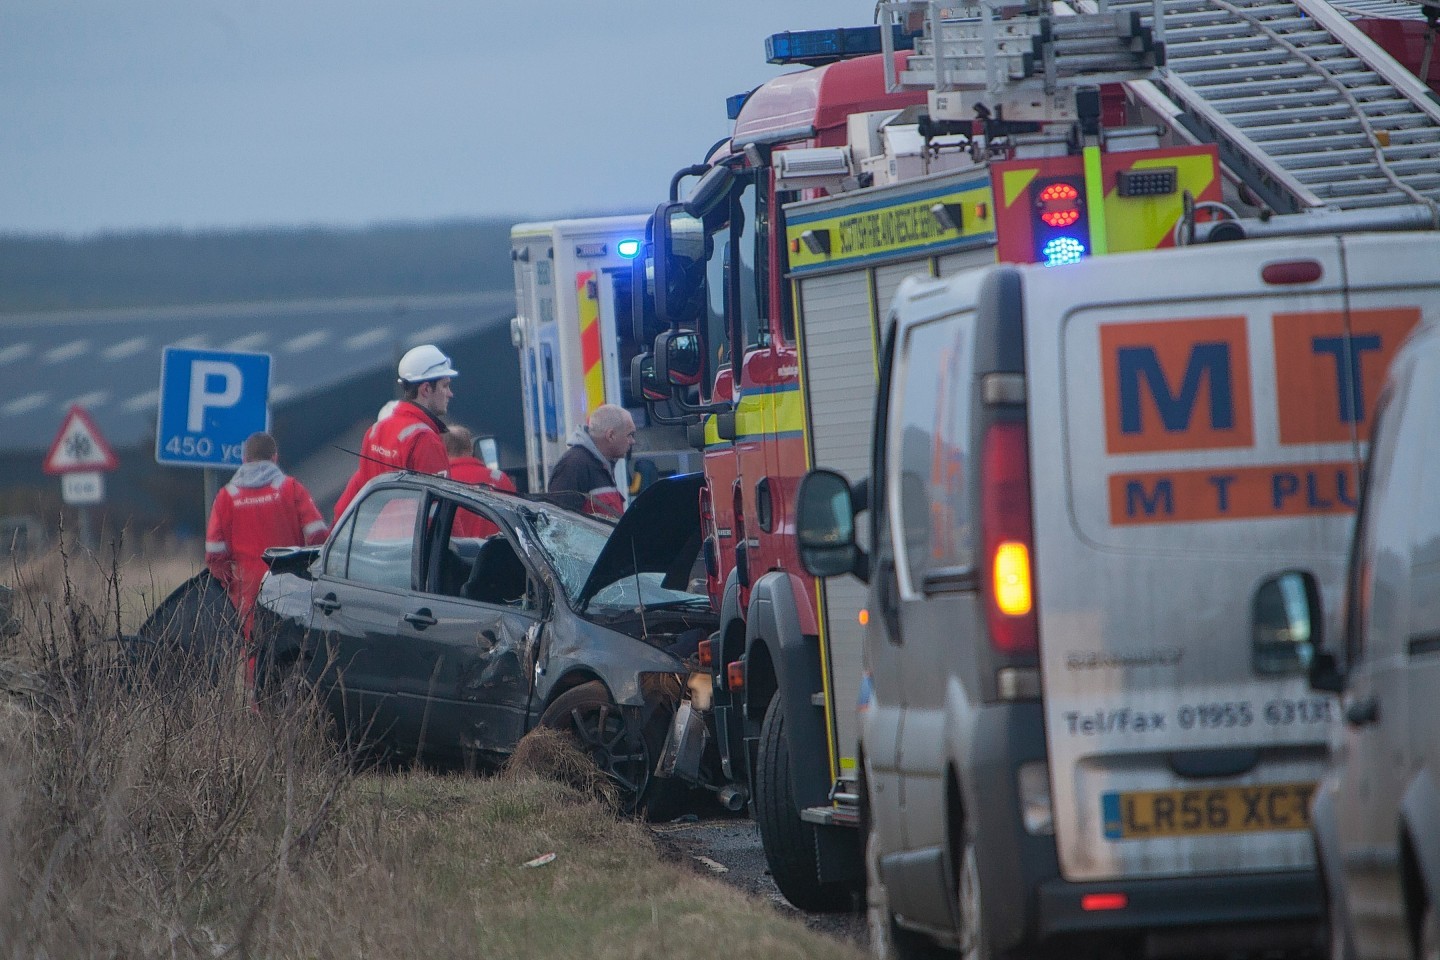 Emergency services at the scene of the accident on the A99